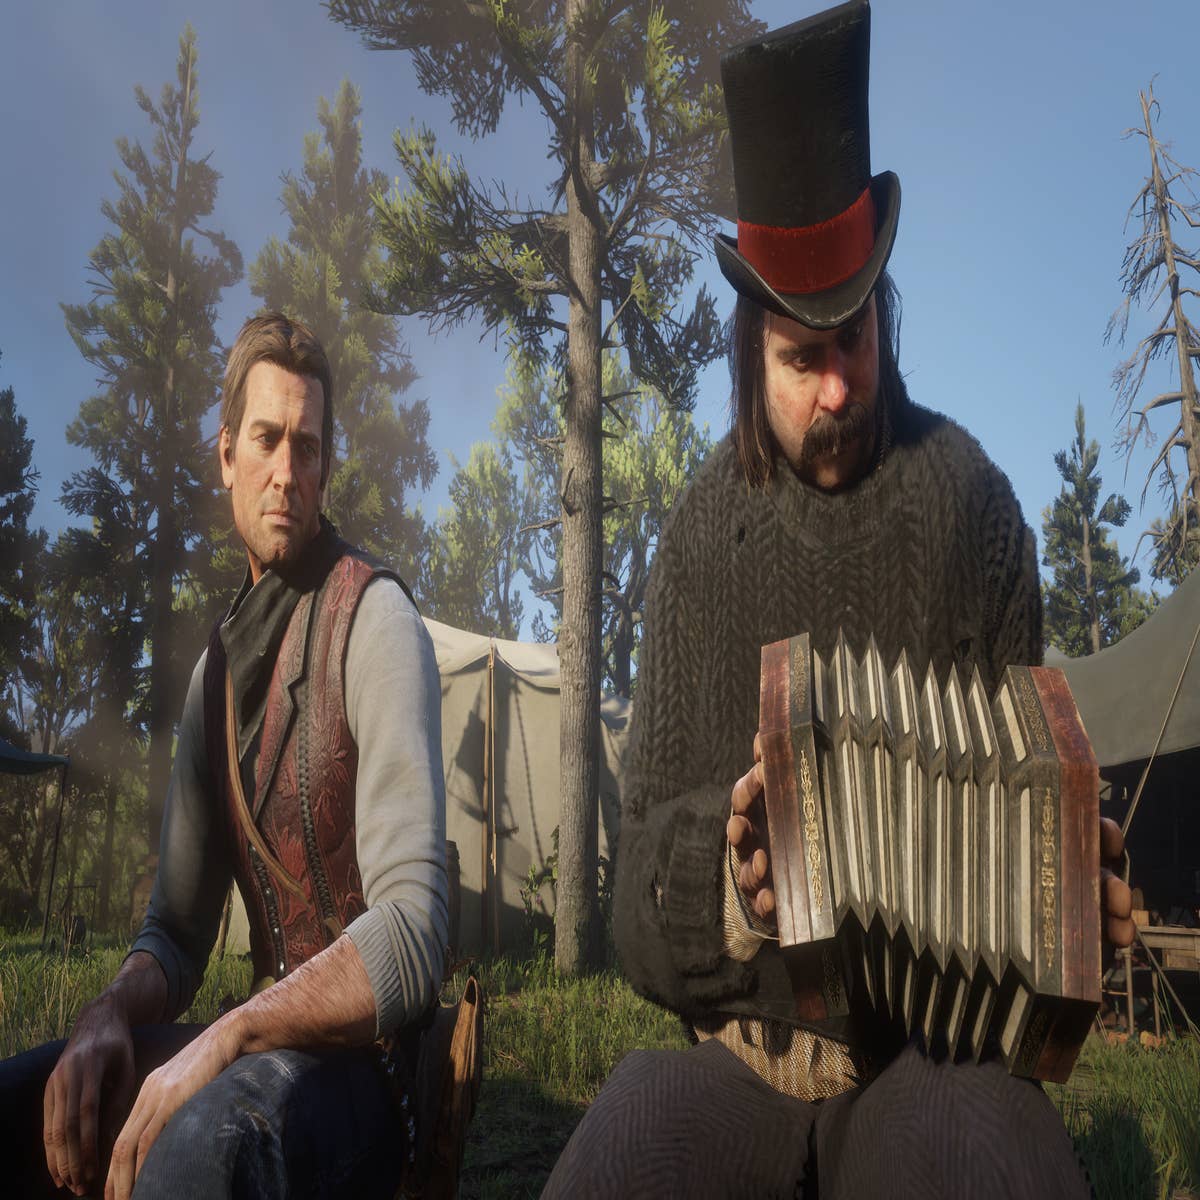 These mods turn Red Dead Redemption 2 into the mundane job sim it was  always supposed to be